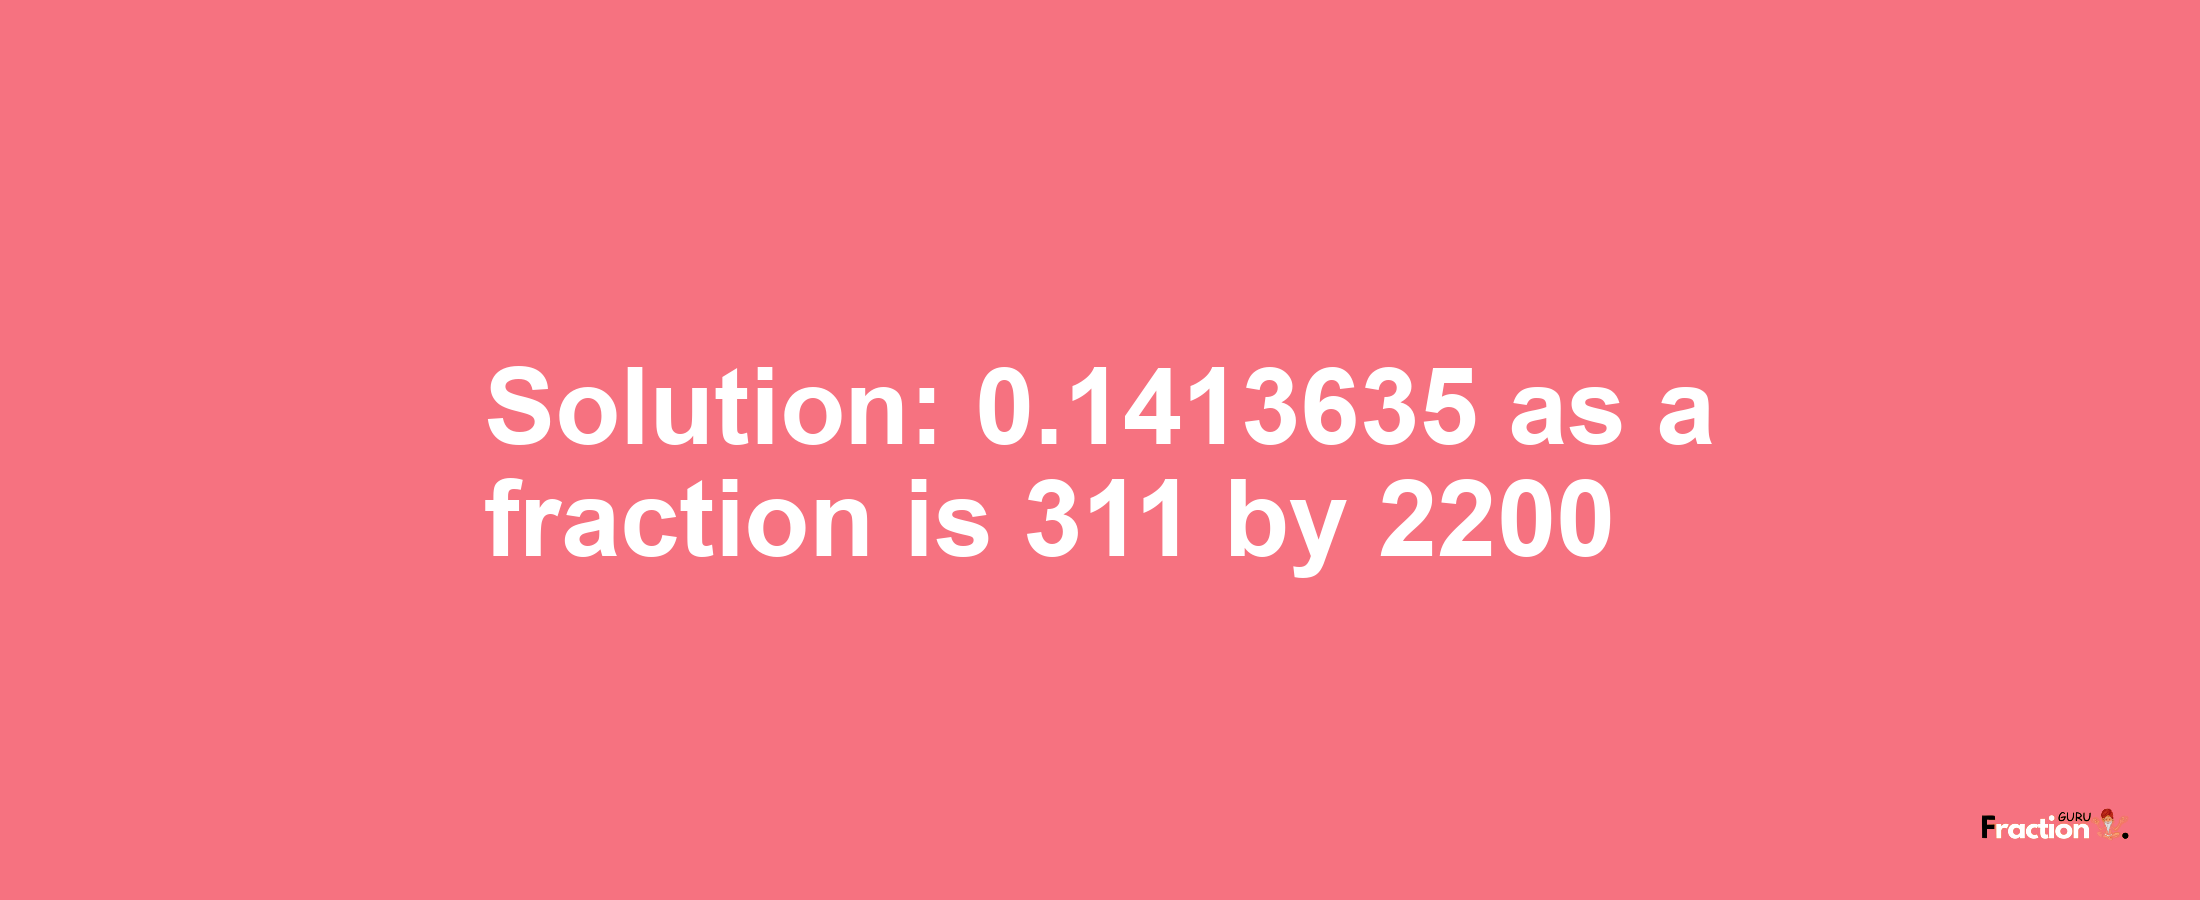 Solution:0.1413635 as a fraction is 311/2200